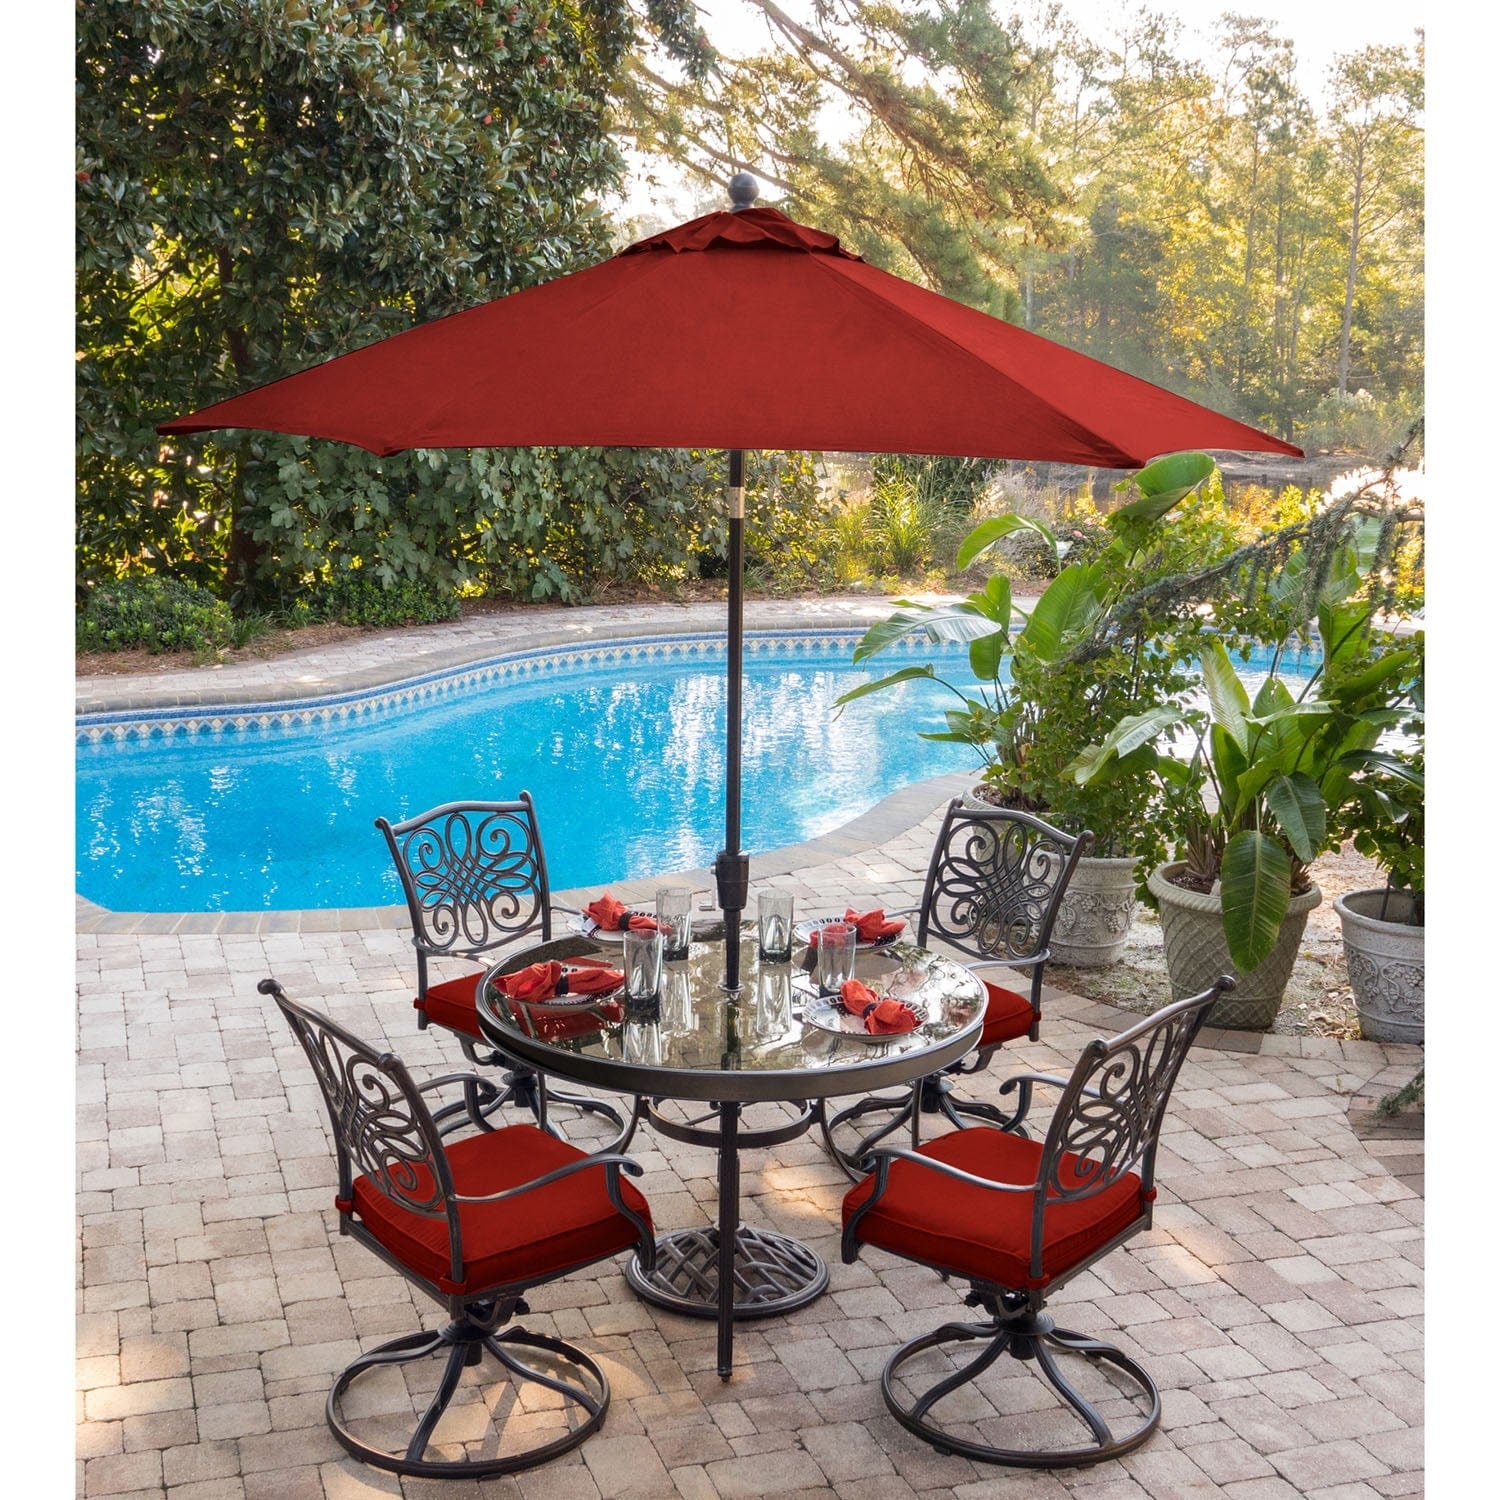 Hanover Table Umbrellas Hanover Traditions 9 Ft. Table Umbrella in Red | TRADUMBRED